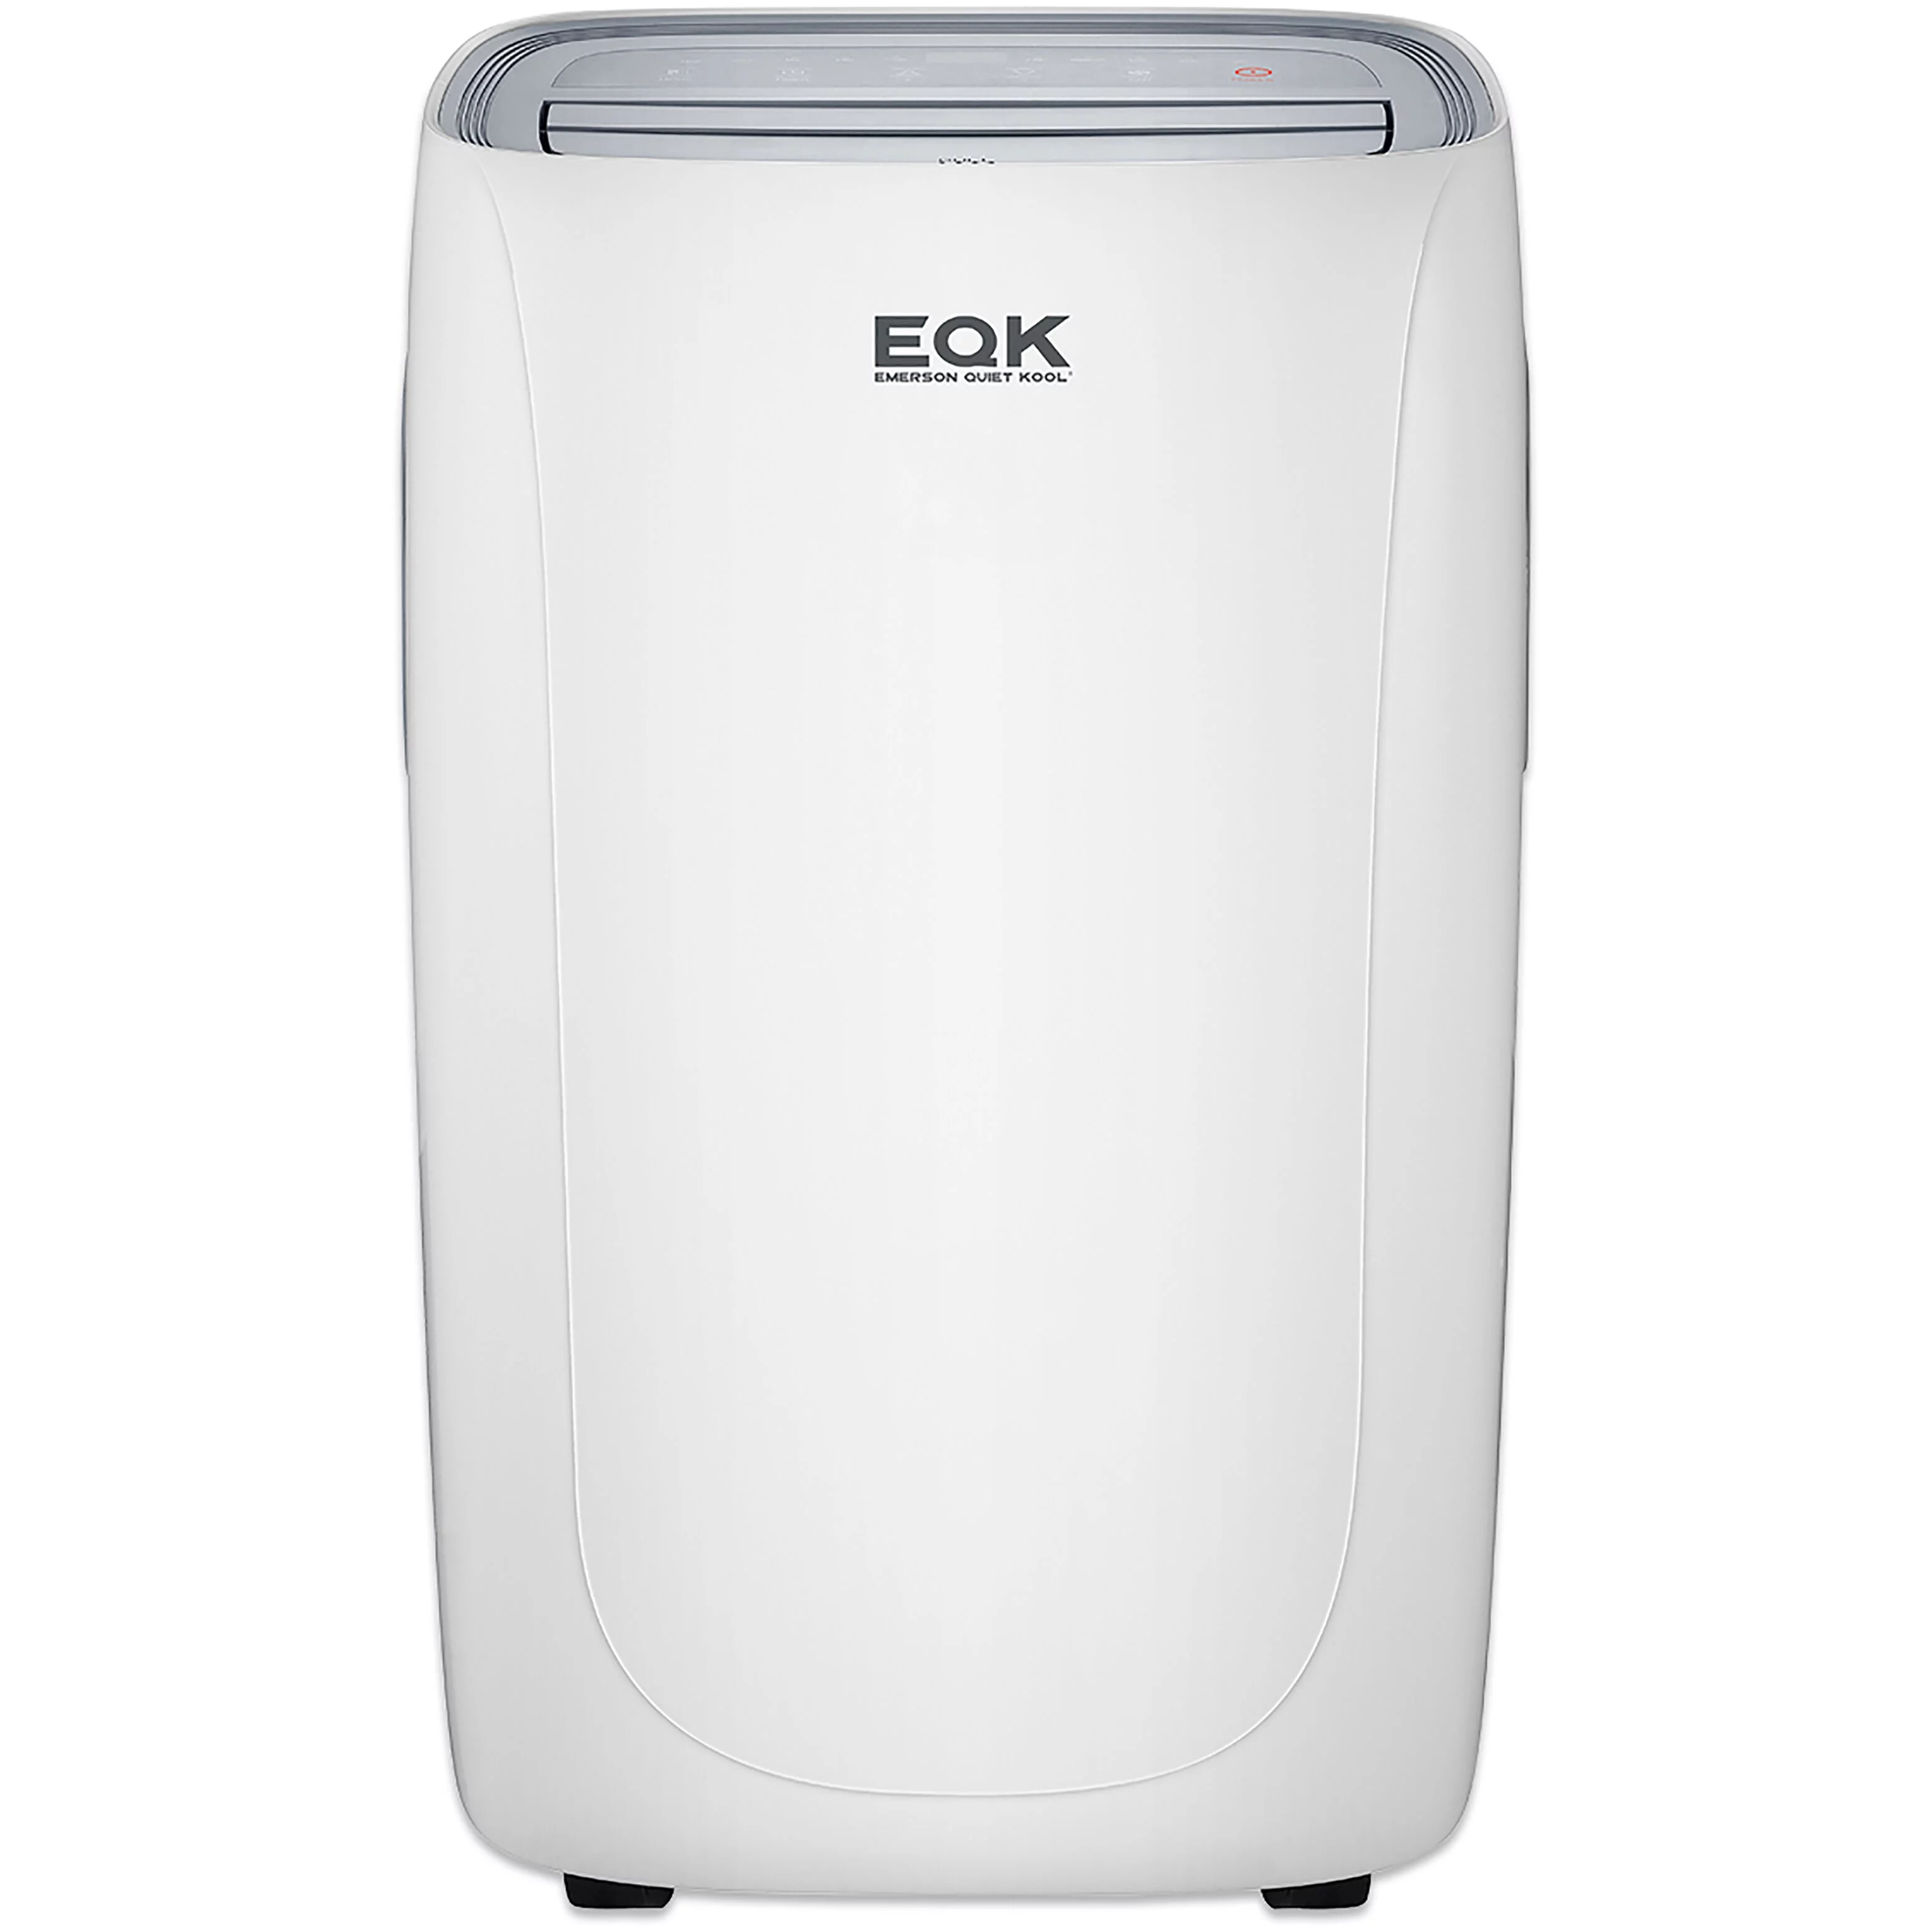 Emerson Quiet Kool SMART Portable Air Conditioner with Remote, Wi-Fi, and Voice Control for Rooms up to 450-Sq. ft